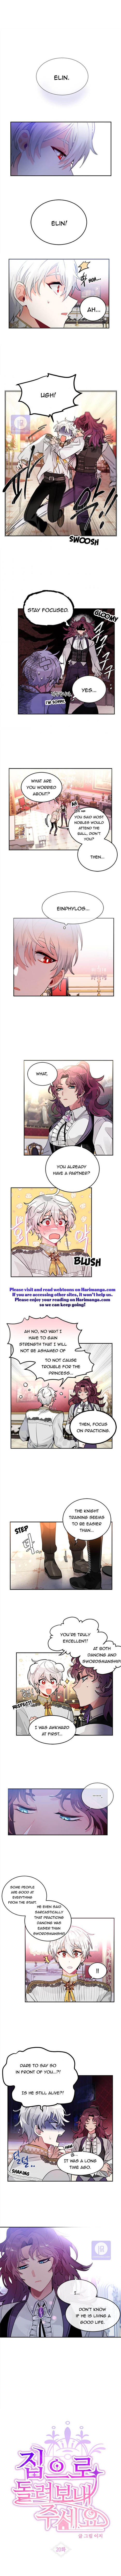 Please, Let Me Return Home - Page 1